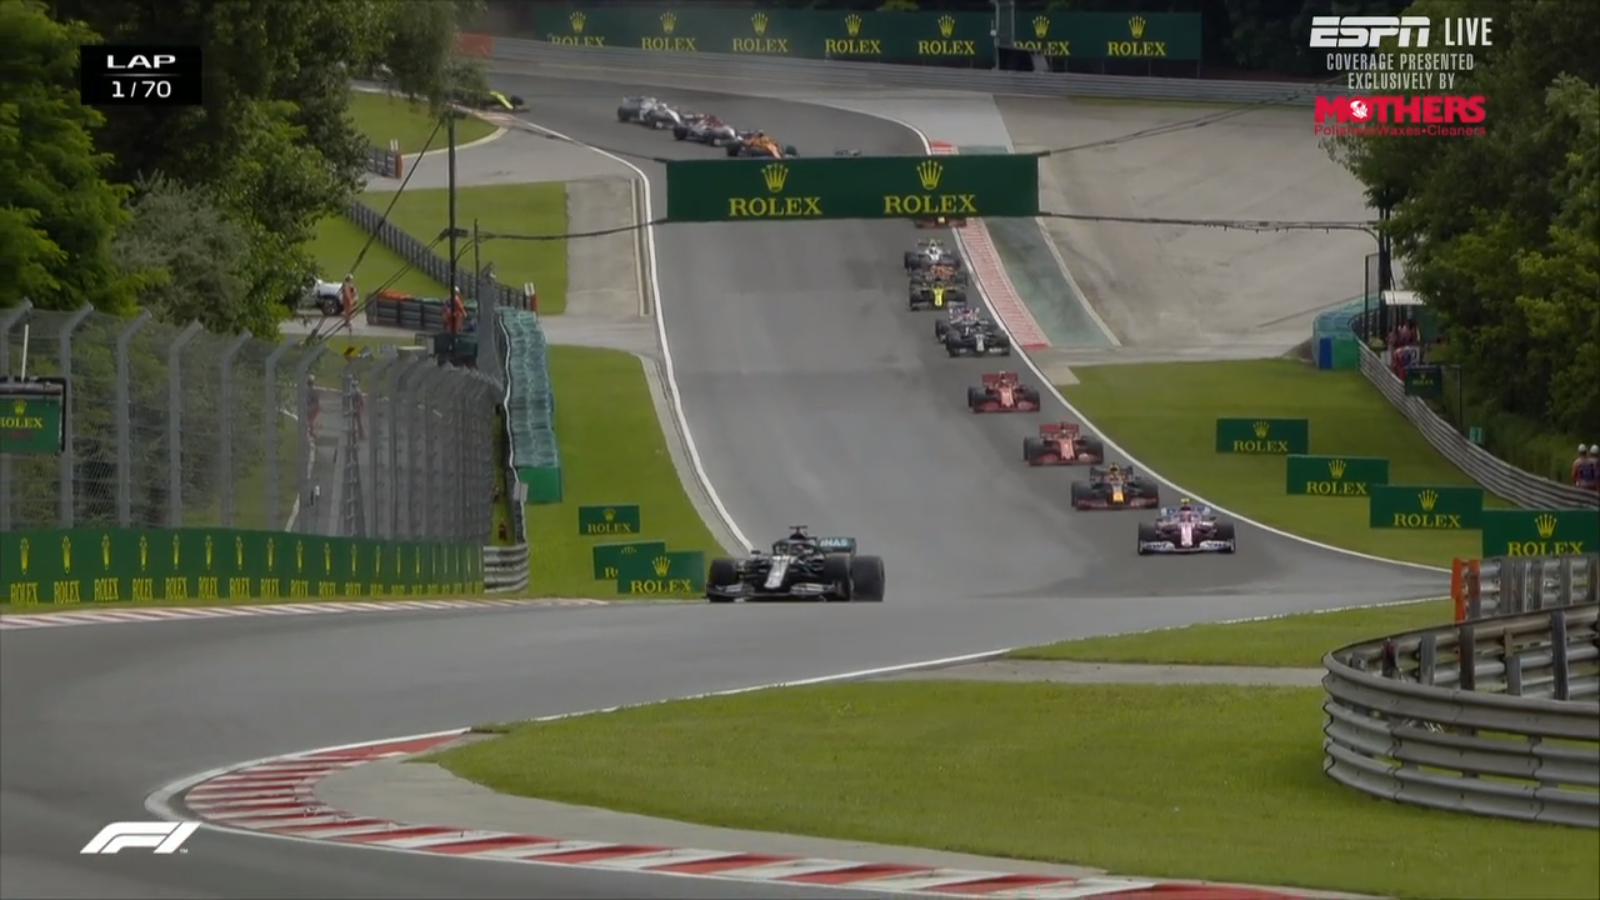 Lewis Hamilton out in front on Lap 1; the field takes the 'racing line' out of one turn to line up for the apex of the next turn.